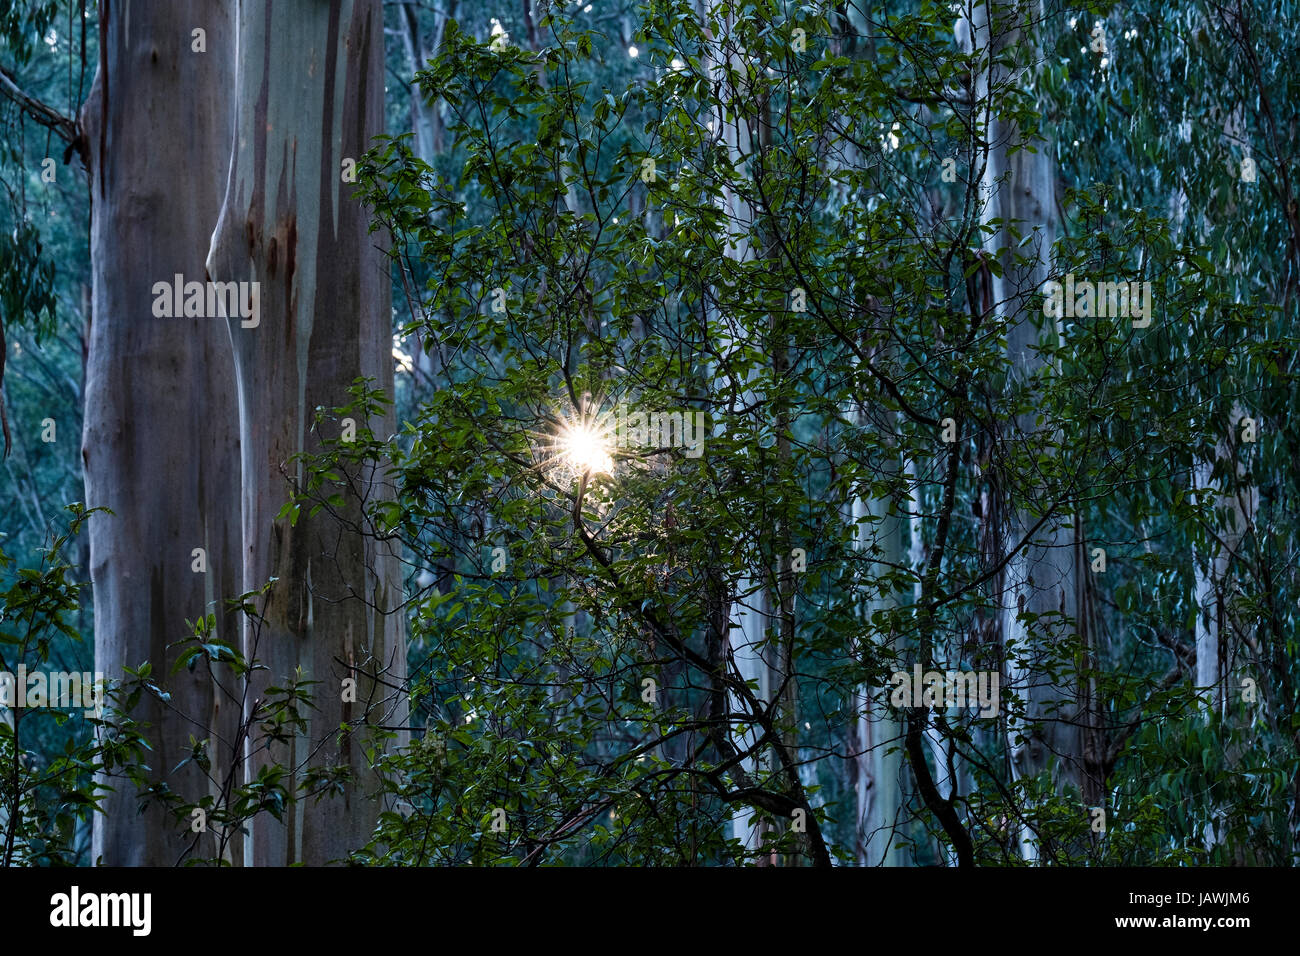 Dappled sunlight filters through the giant trunk of a Mountain Ash forest. Stock Photo